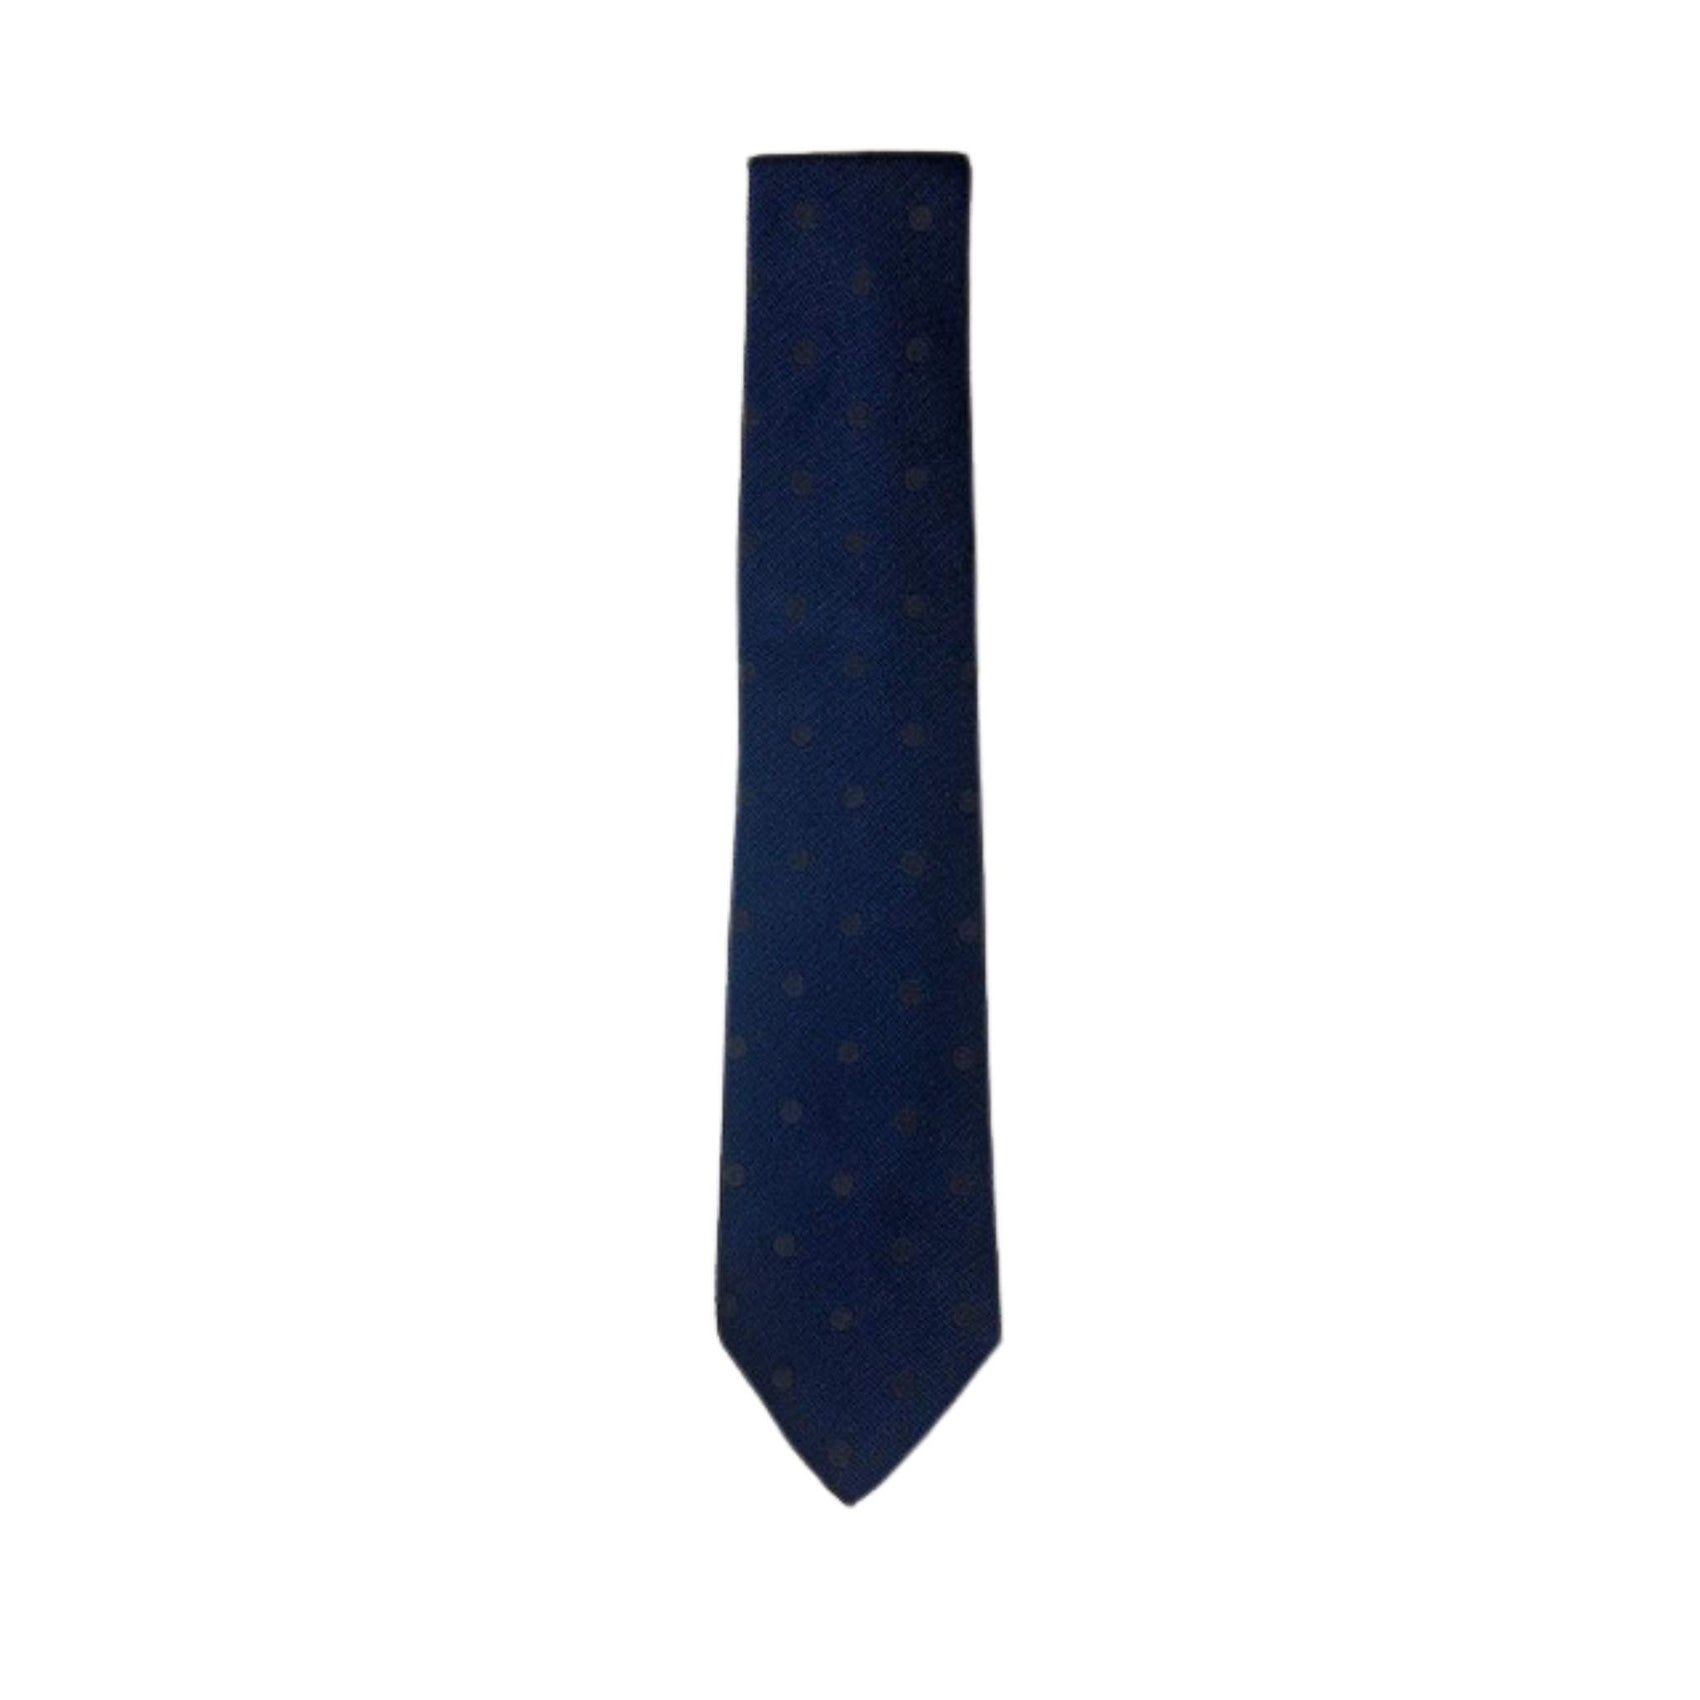 Navy and Brown spot tie